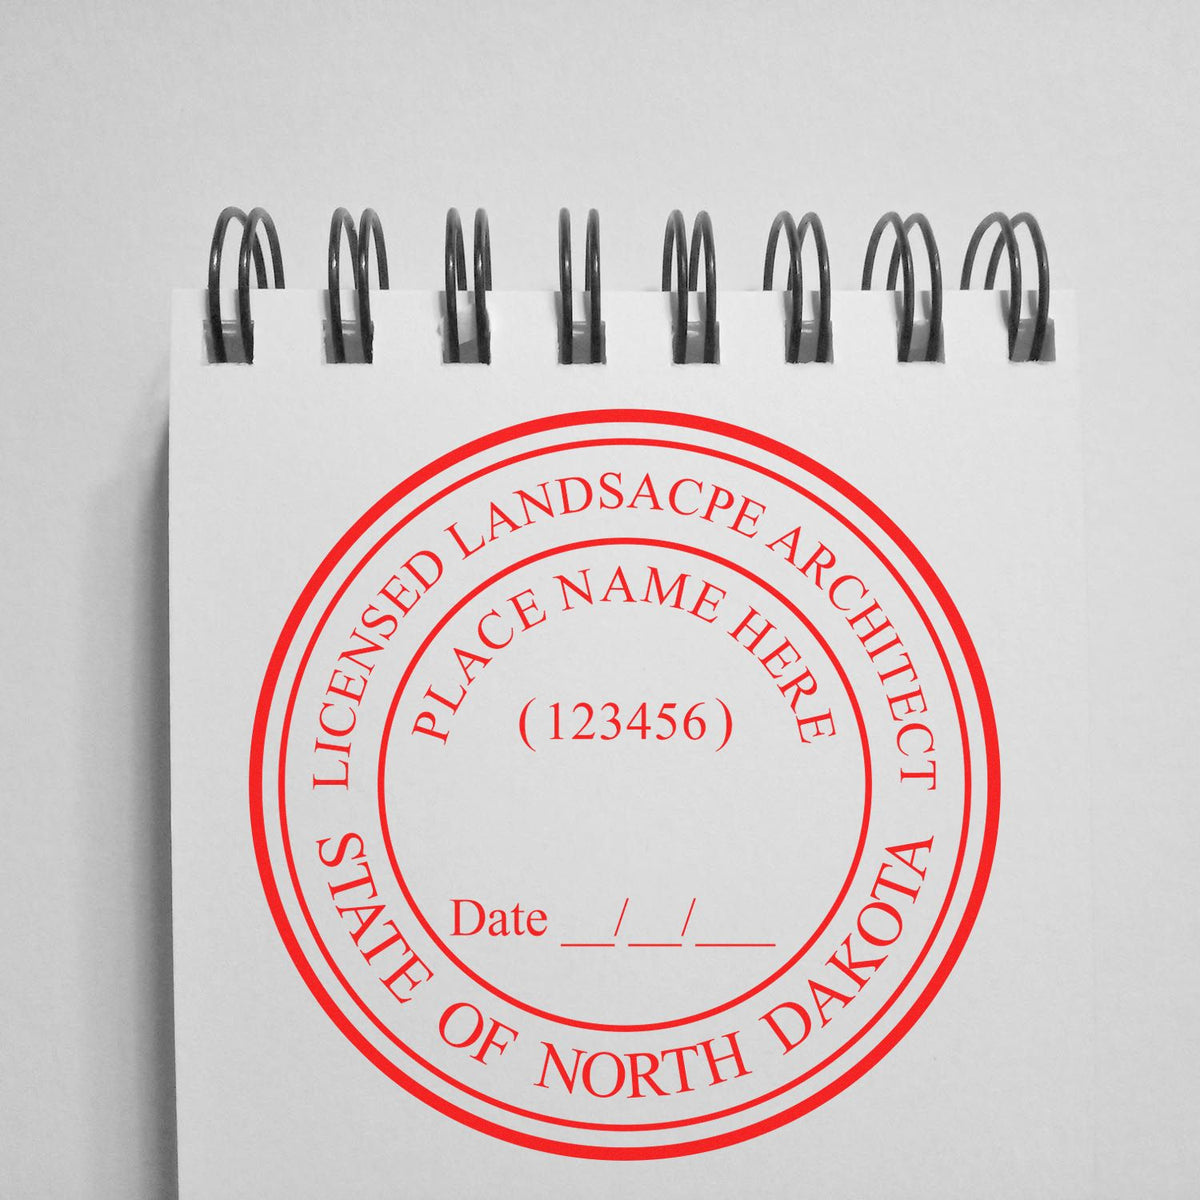 An alternative view of the Premium MaxLight Pre-Inked North Dakota Landscape Architectural Stamp stamped on a sheet of paper showing the image in use